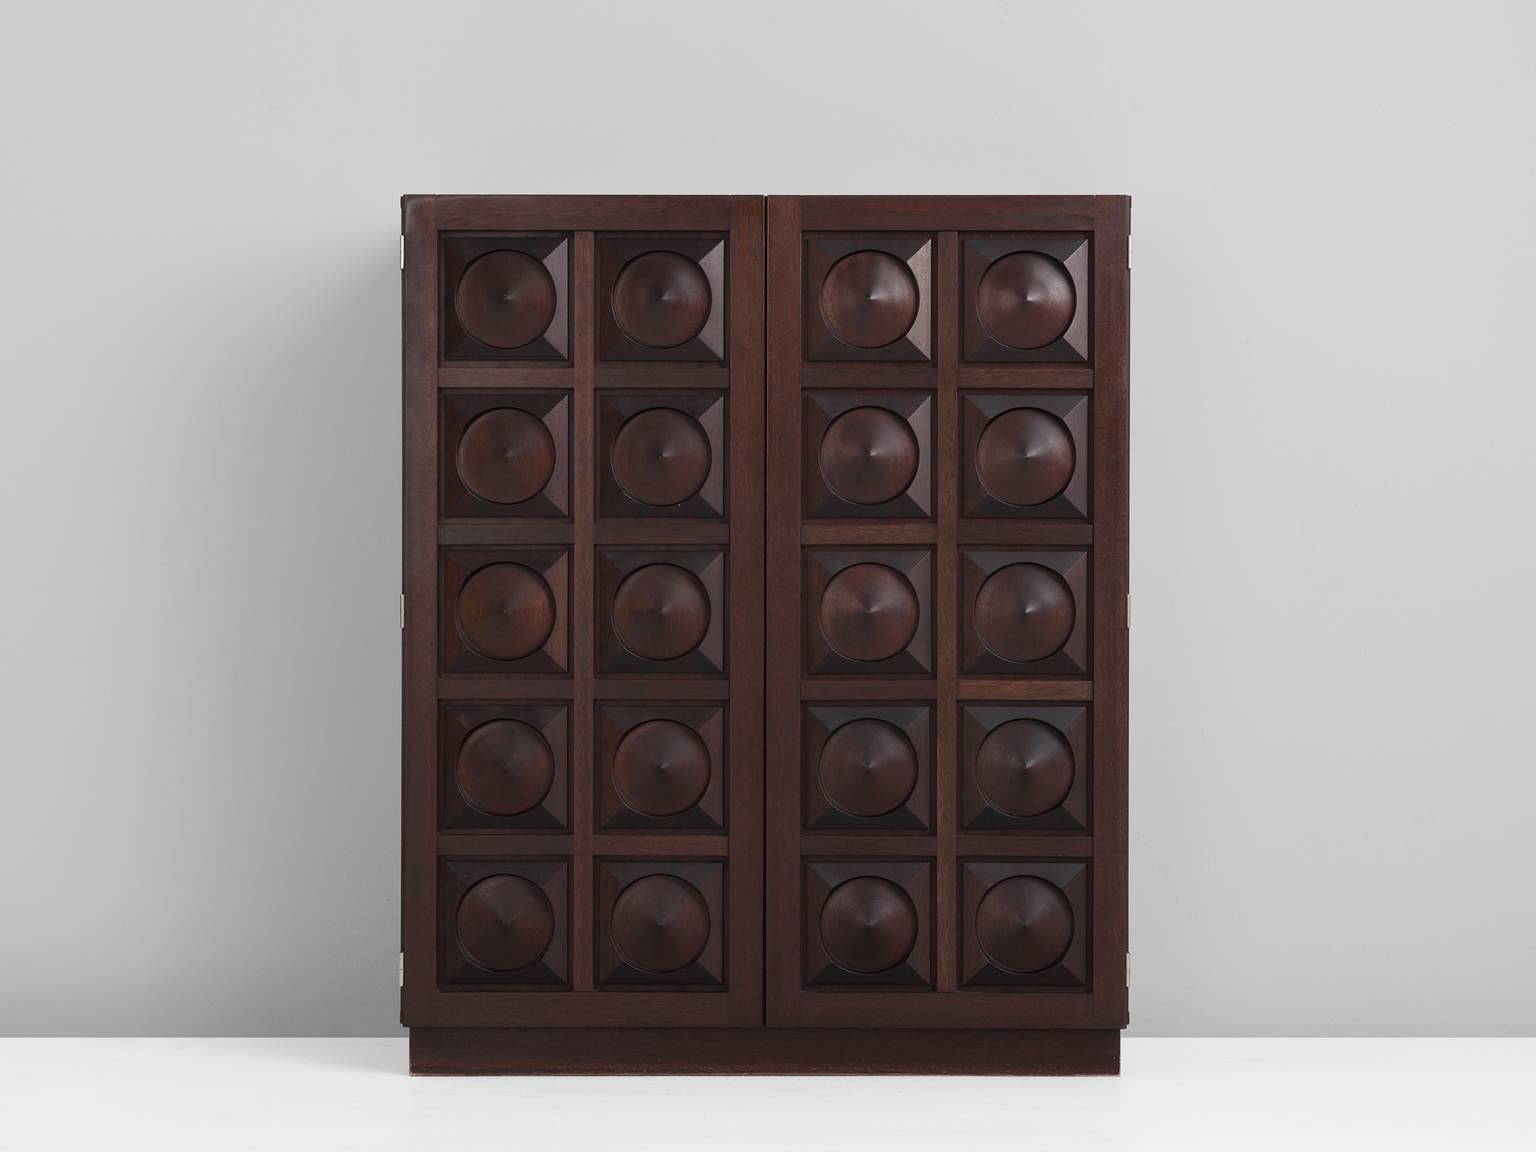 Bar cabinet, in mahogany, plastic and wood, Europe 1970s.

Brutalist highboard in dark brown stained mahogany. This cabinet shows excellent woodwork on the two door panels. A combination of squares and circles is combined into a graphical and